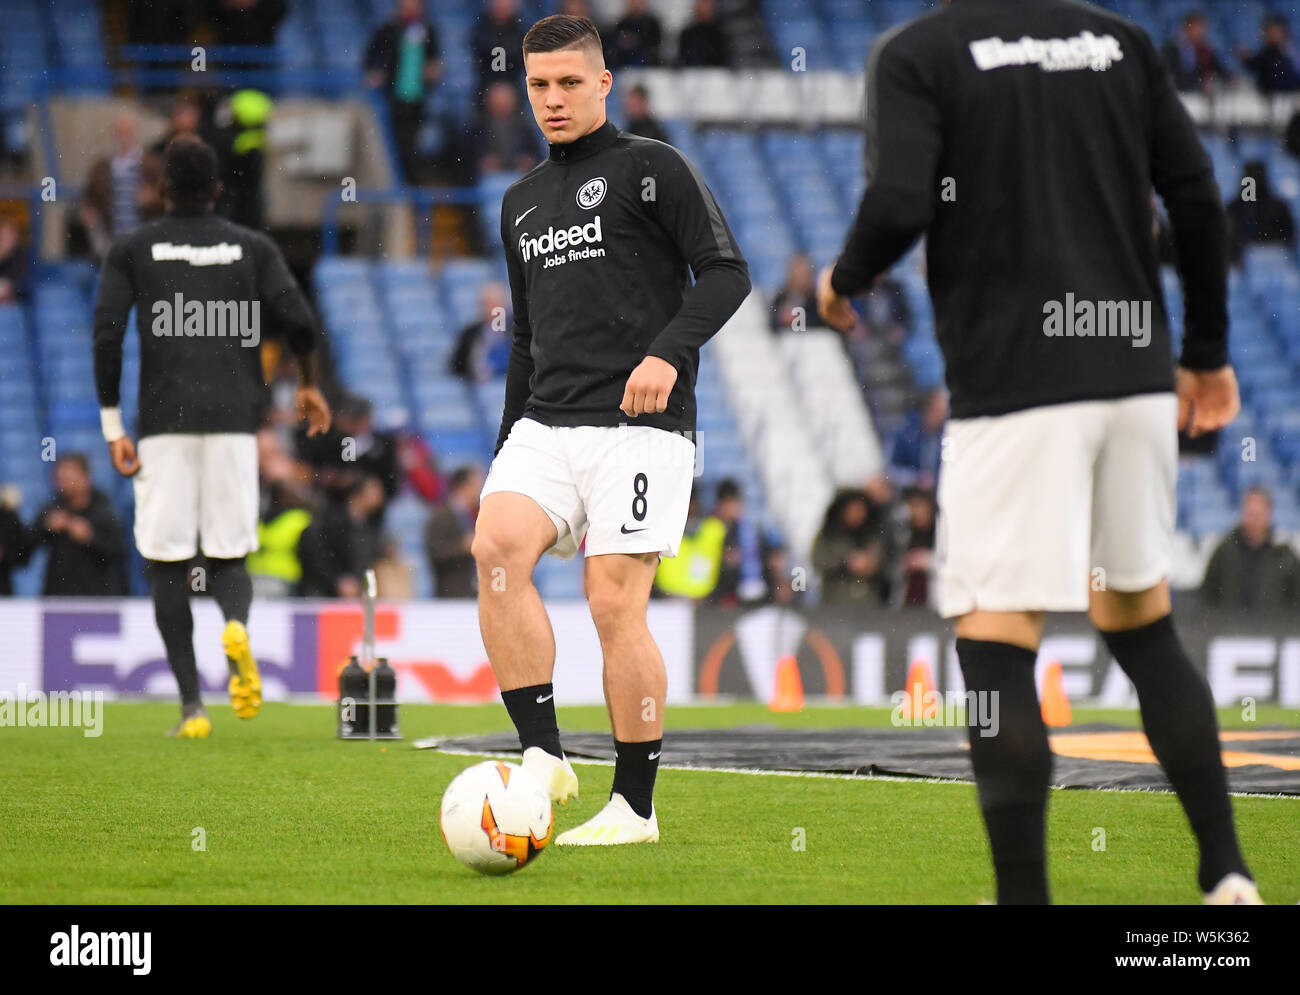 LONDON, ENGLAND - MAY 9, 2019: Luka Jovic of Eintracht pictured prior to the second leg of the 2018/19 UEFA Europa League Semi-Finals game between Chelsea FC (England) and Eintracht Frankfurt e.V. (Germany) at Stamford Bridge. Stock Photo